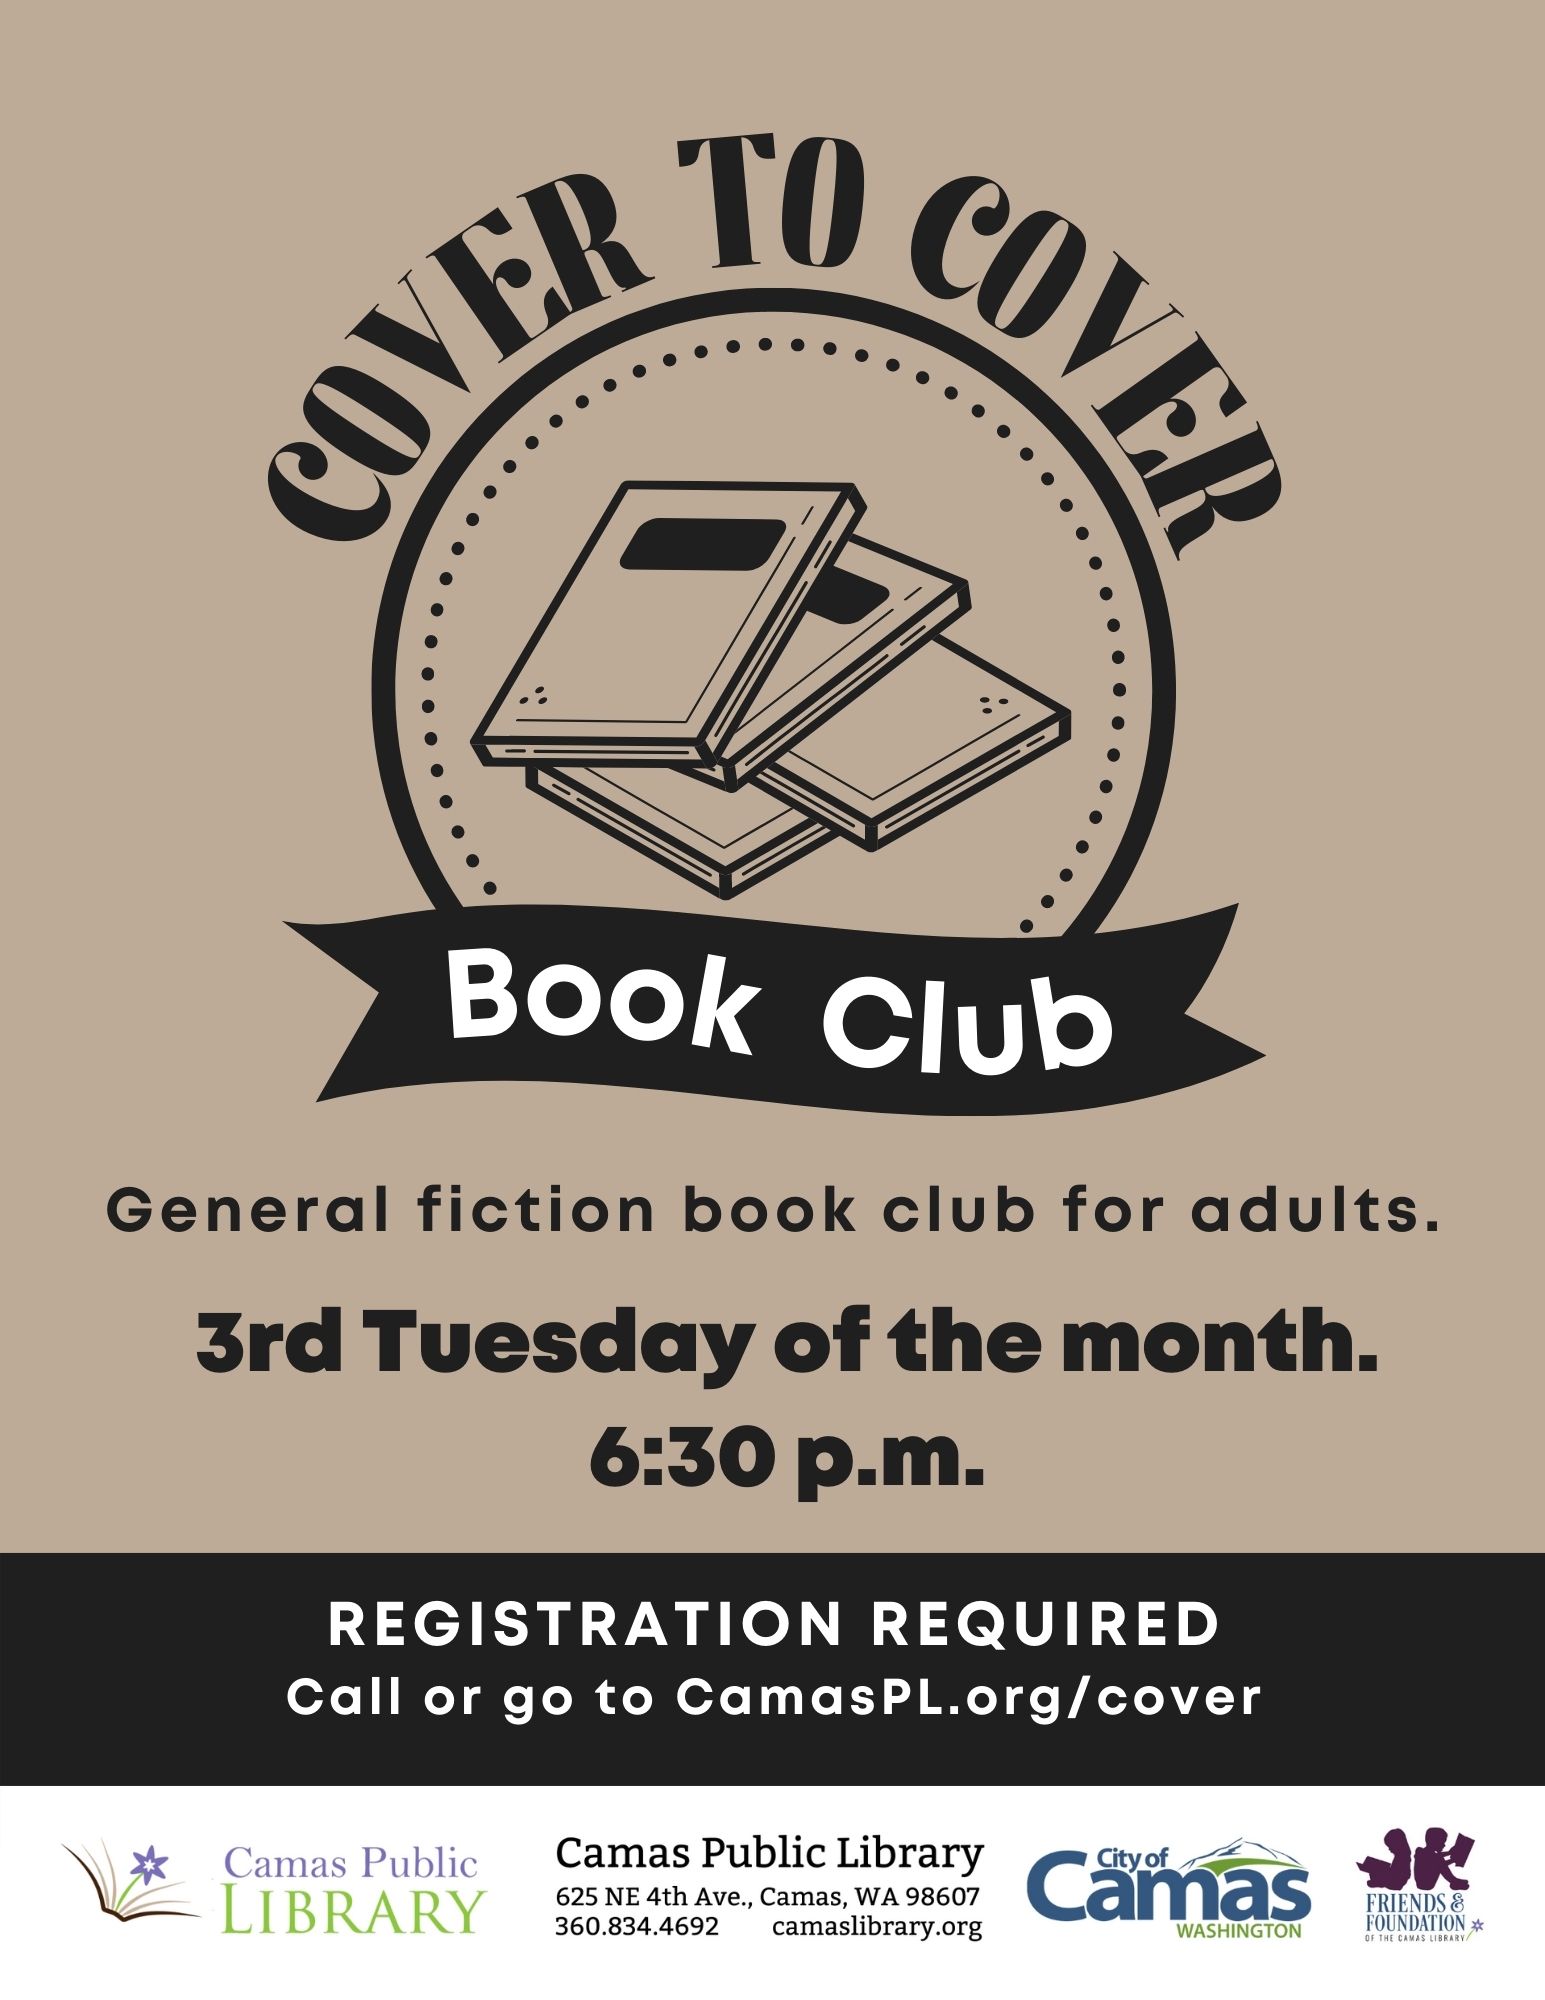 Camas Library offers “Cover to Cover” Book Club – Events